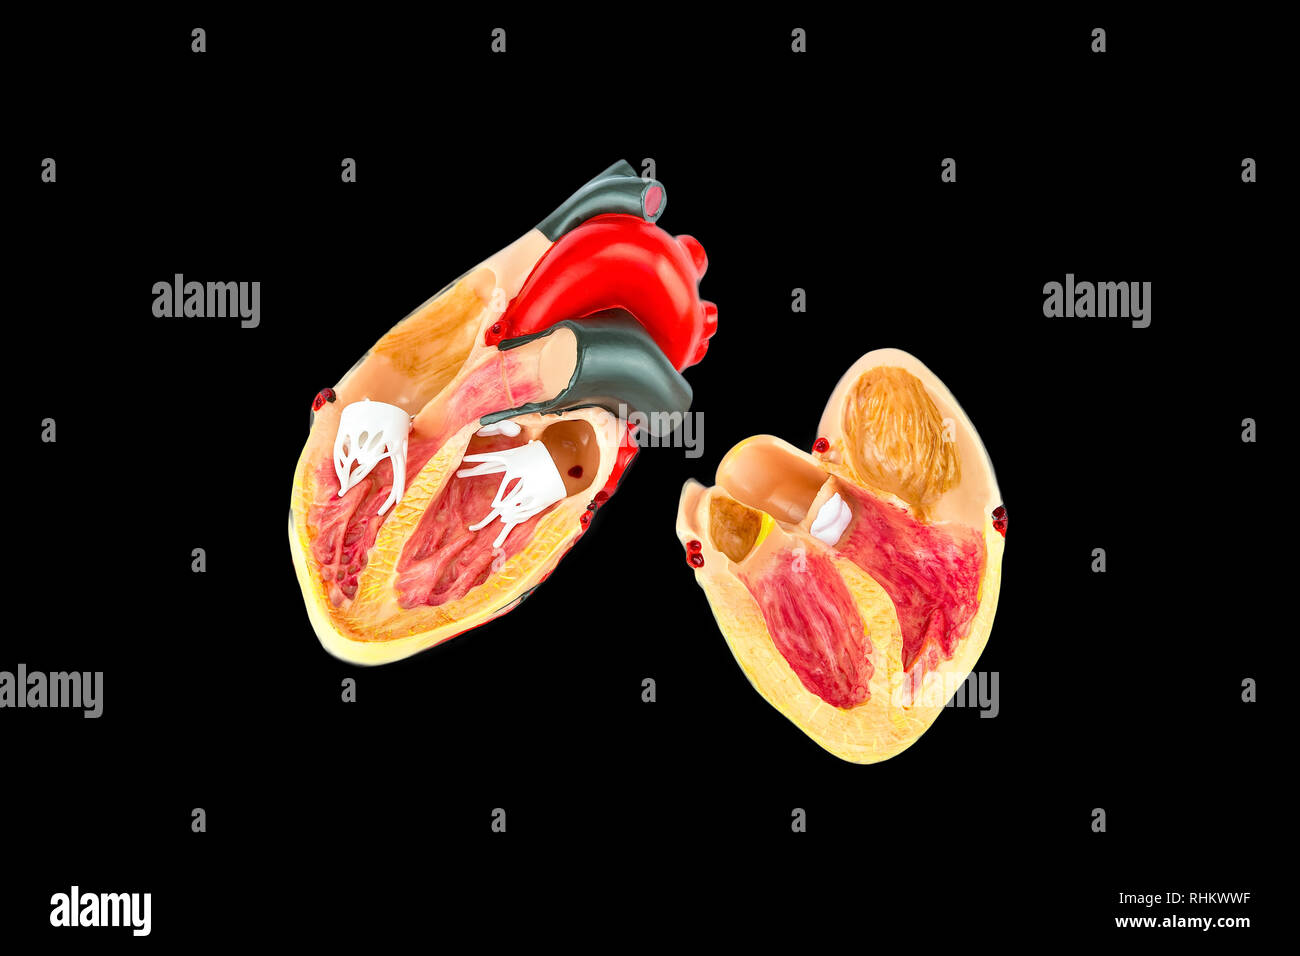 Inside of human heart model isolated on black background Stock Photo